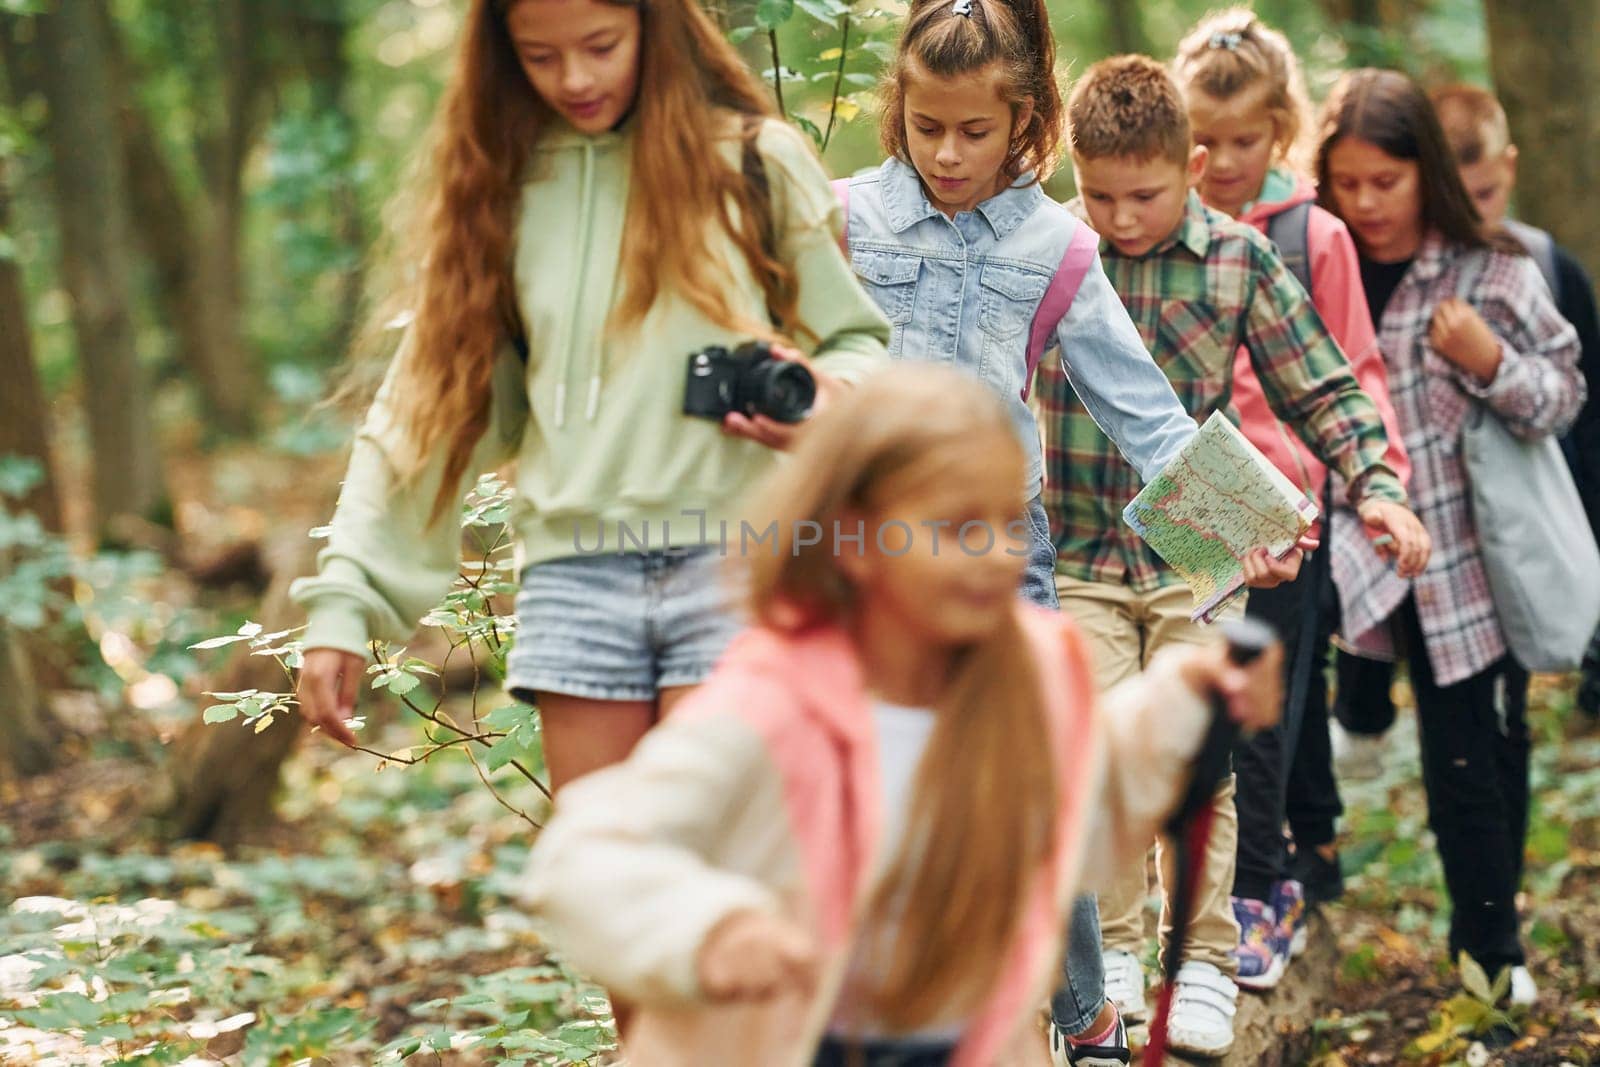 With touristic equipment. Kids in green forest at summer daytime together by Standret